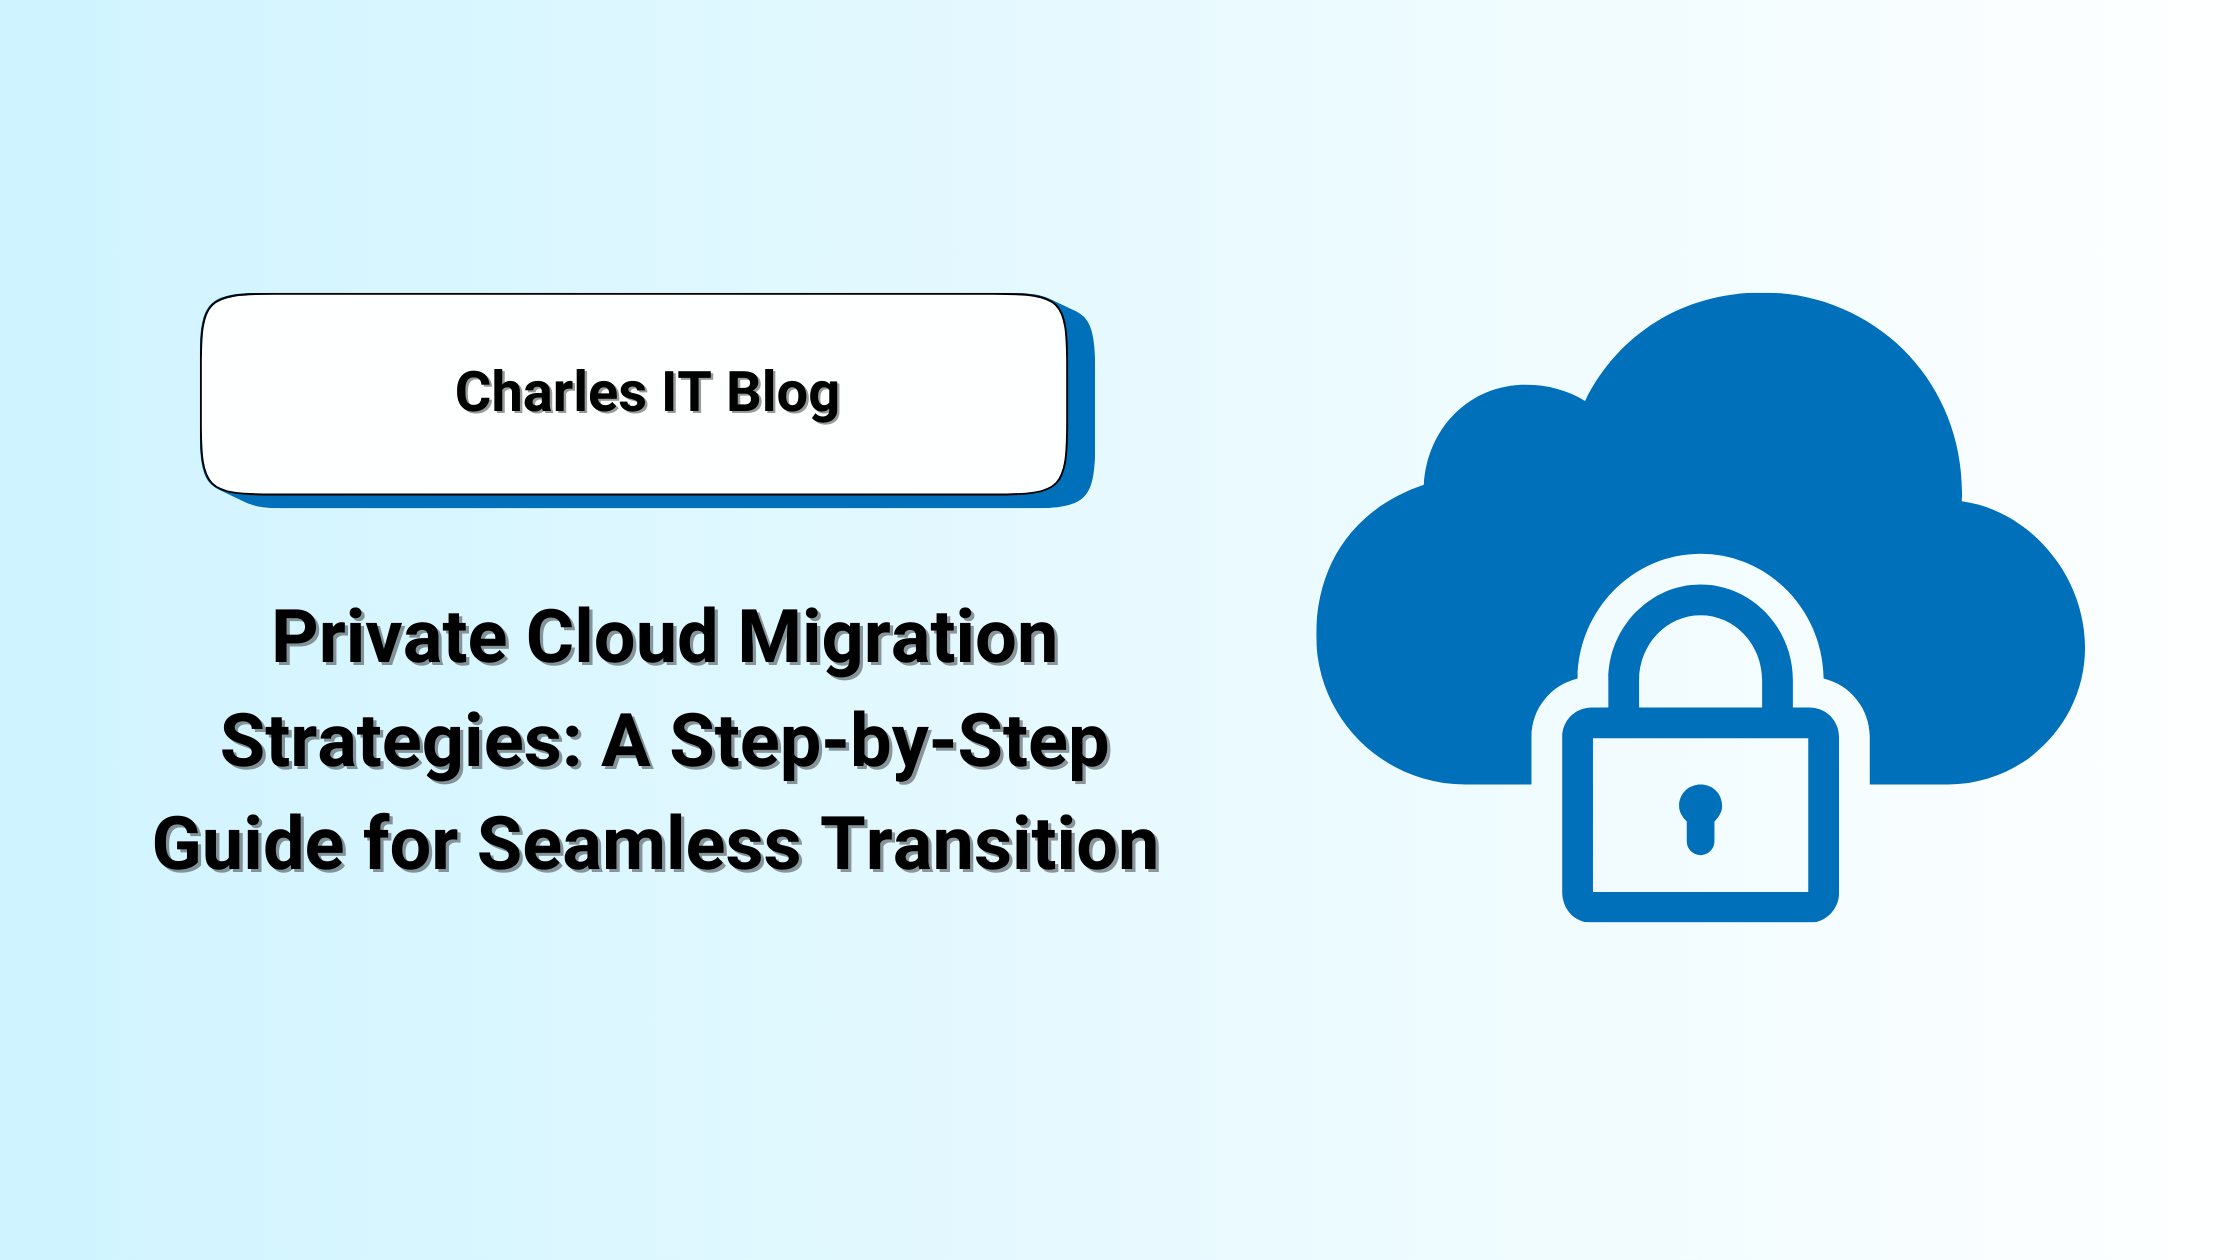 Private Cloud Migration Strategies: A Step-by-Step Guide for Seamless Transition